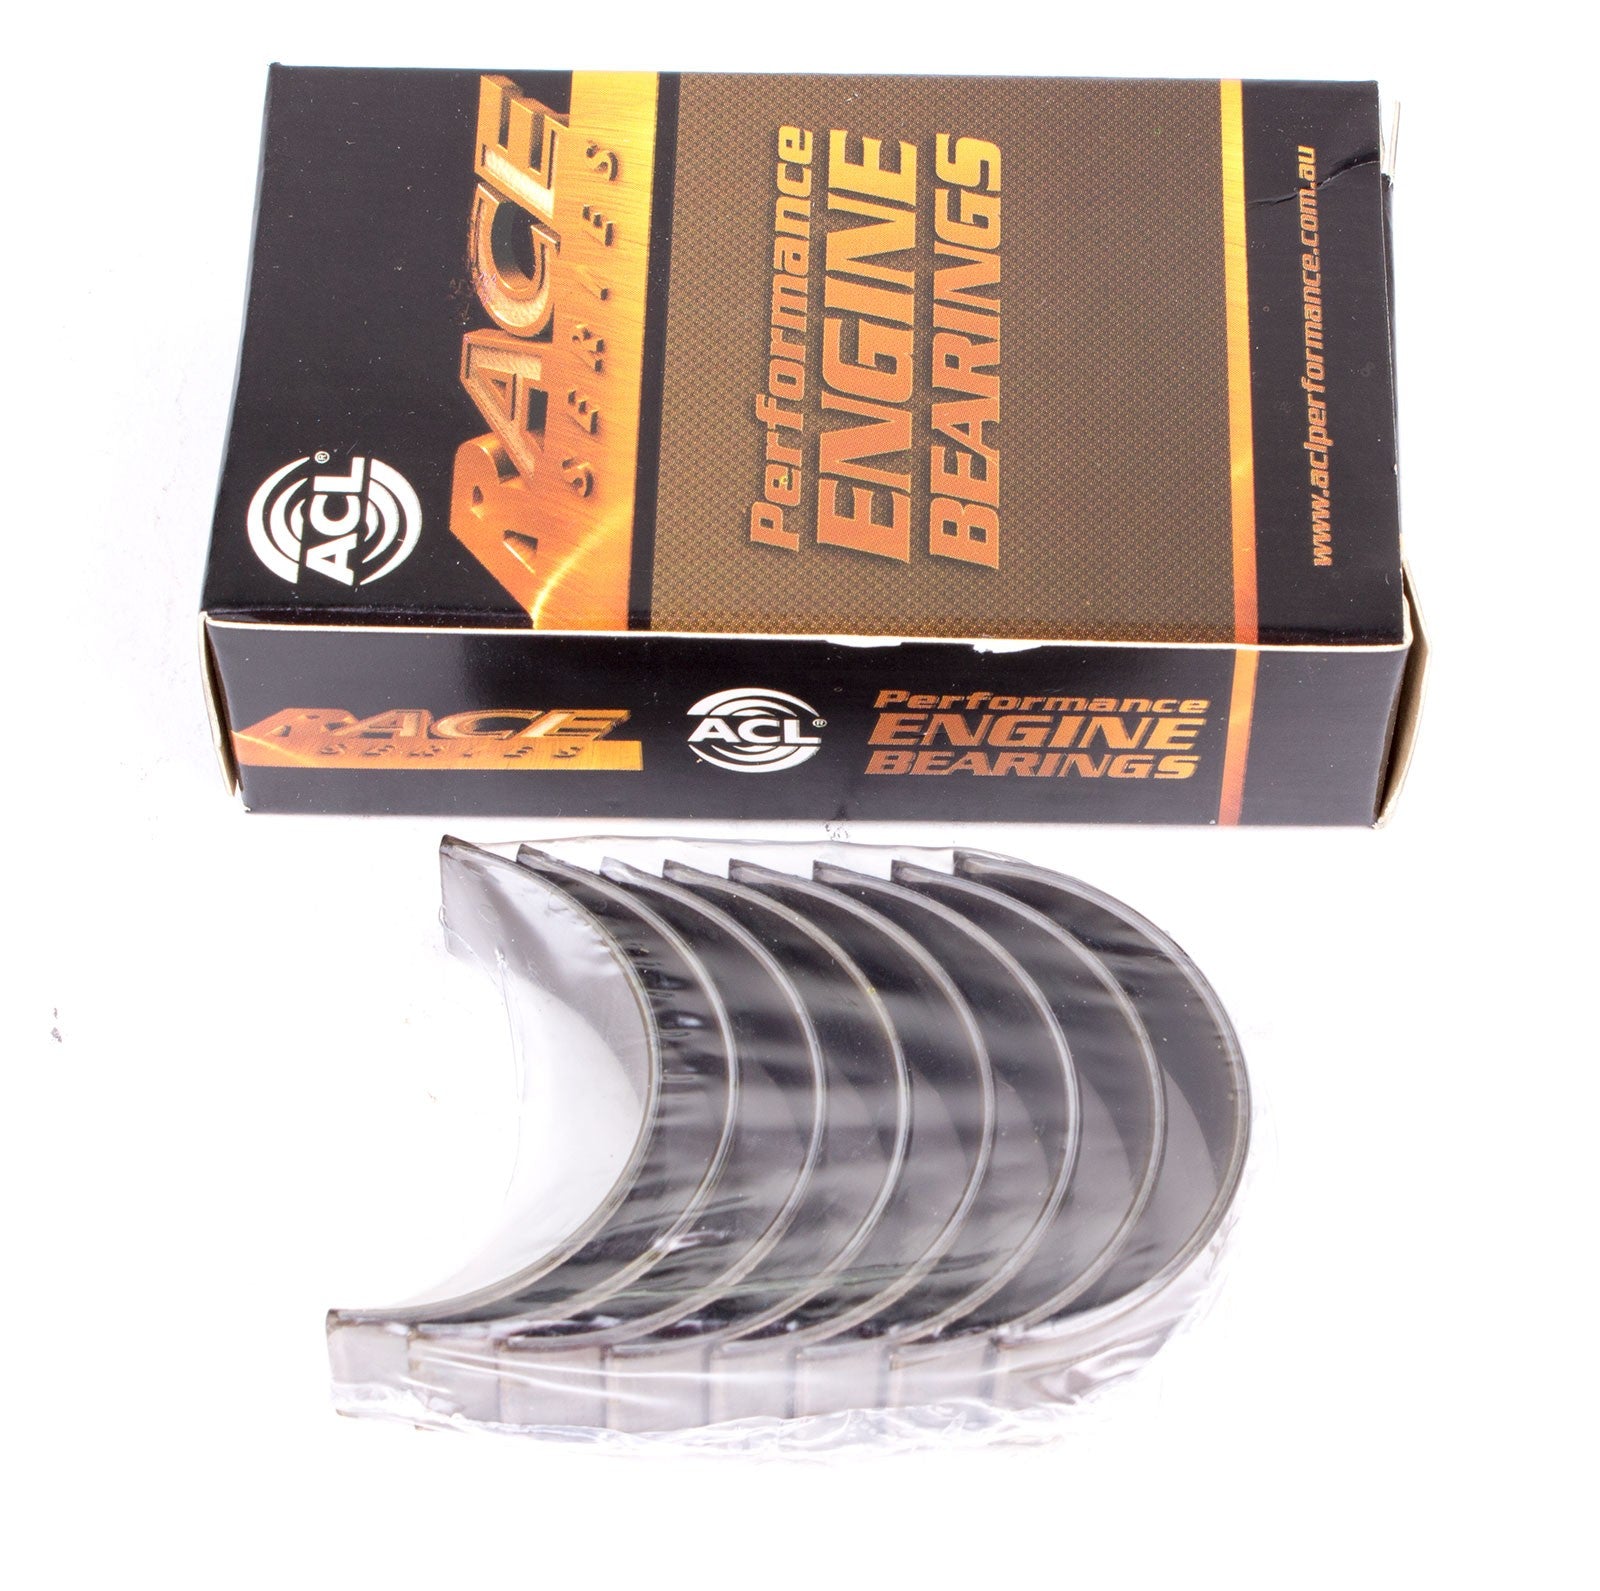 ACL 5M829H-020 Main bearing set (ACL Race Series) Photo-0 